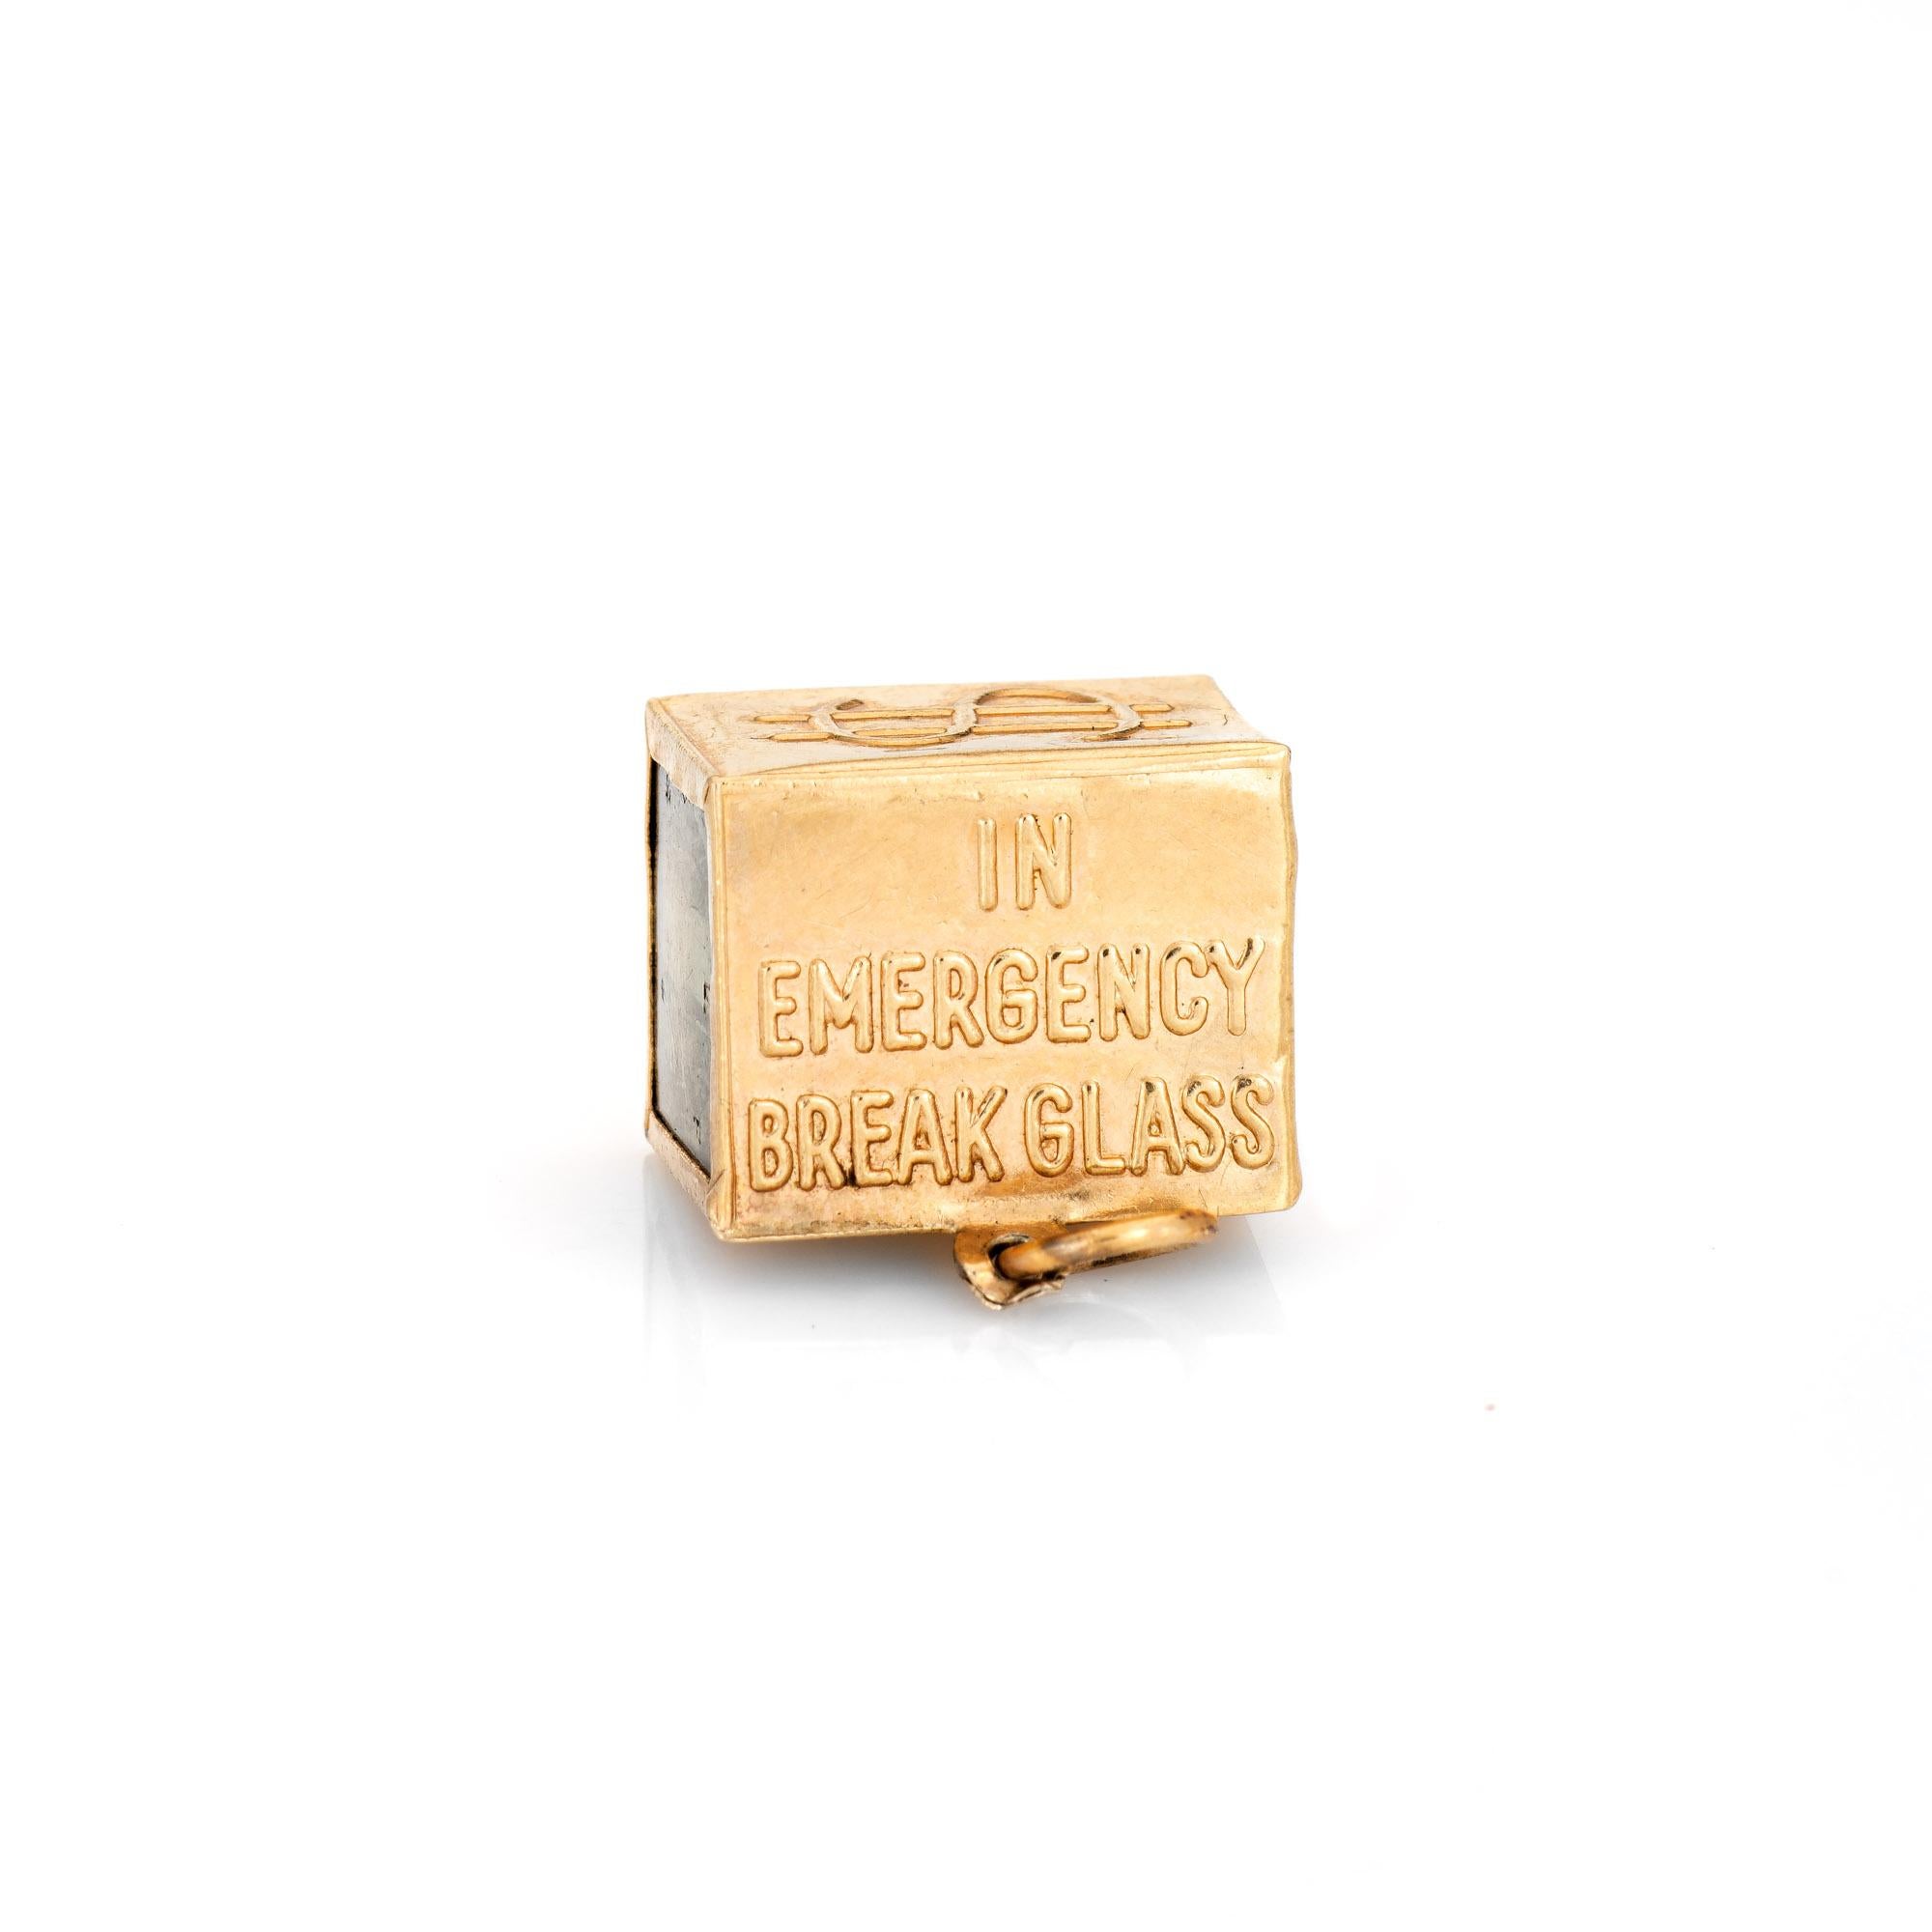 Fun vintage 'Mad Money' charm crafted in 14k yellow gold (circa 1940s to 1950s).  

The four sided charm features a dollar bill folded and placed in the center of the charm, with 